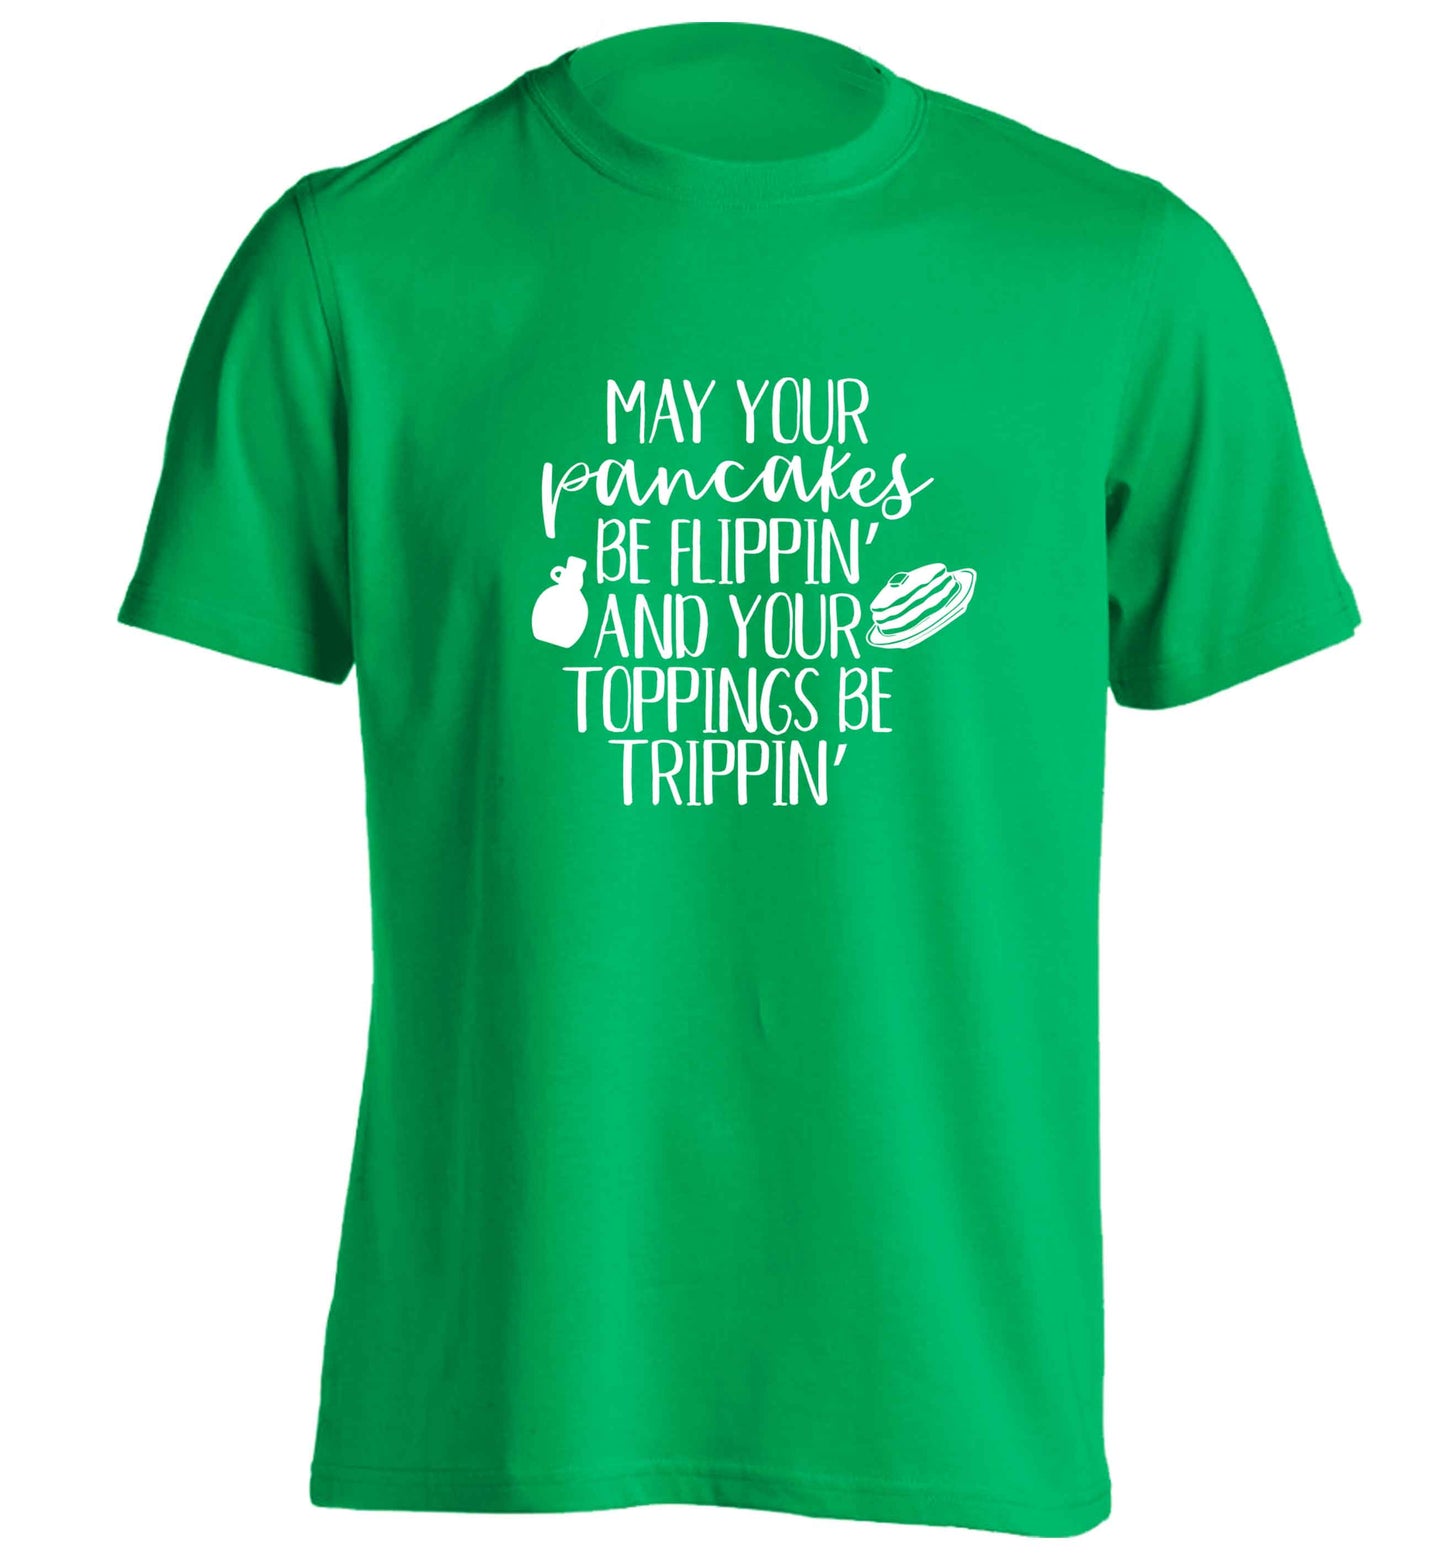 May your pancakes be flippin' and your toppings be trippin' adults unisex green Tshirt 2XL